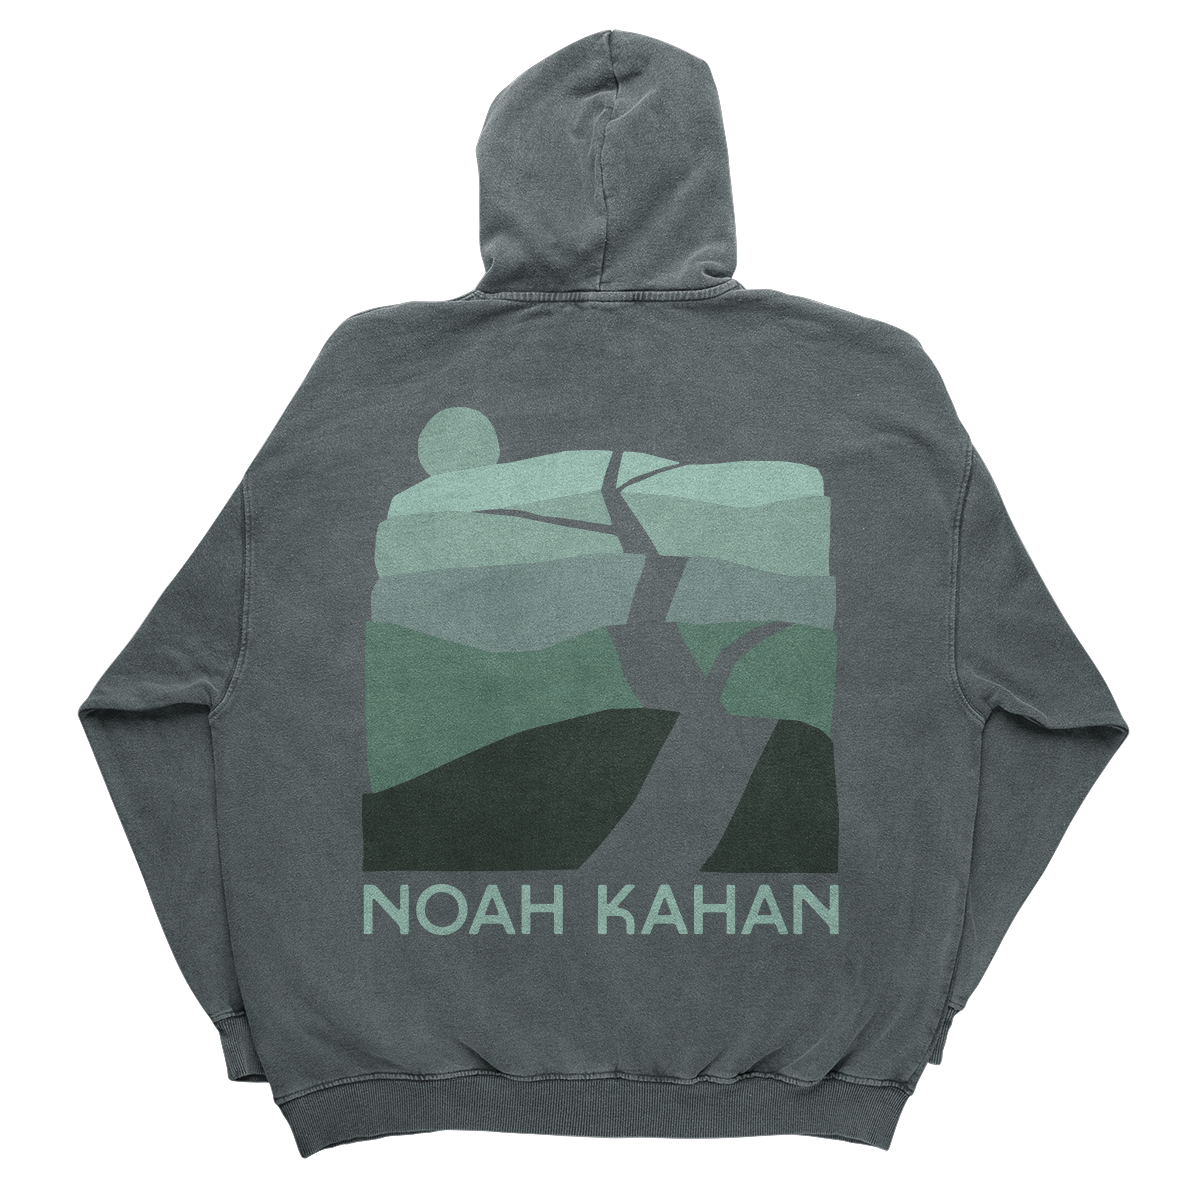 Dark Green Noah Kahan Trails Hoodie with layered hills and trail sunset artwork on back featuring the Noah Kahan name below.. 